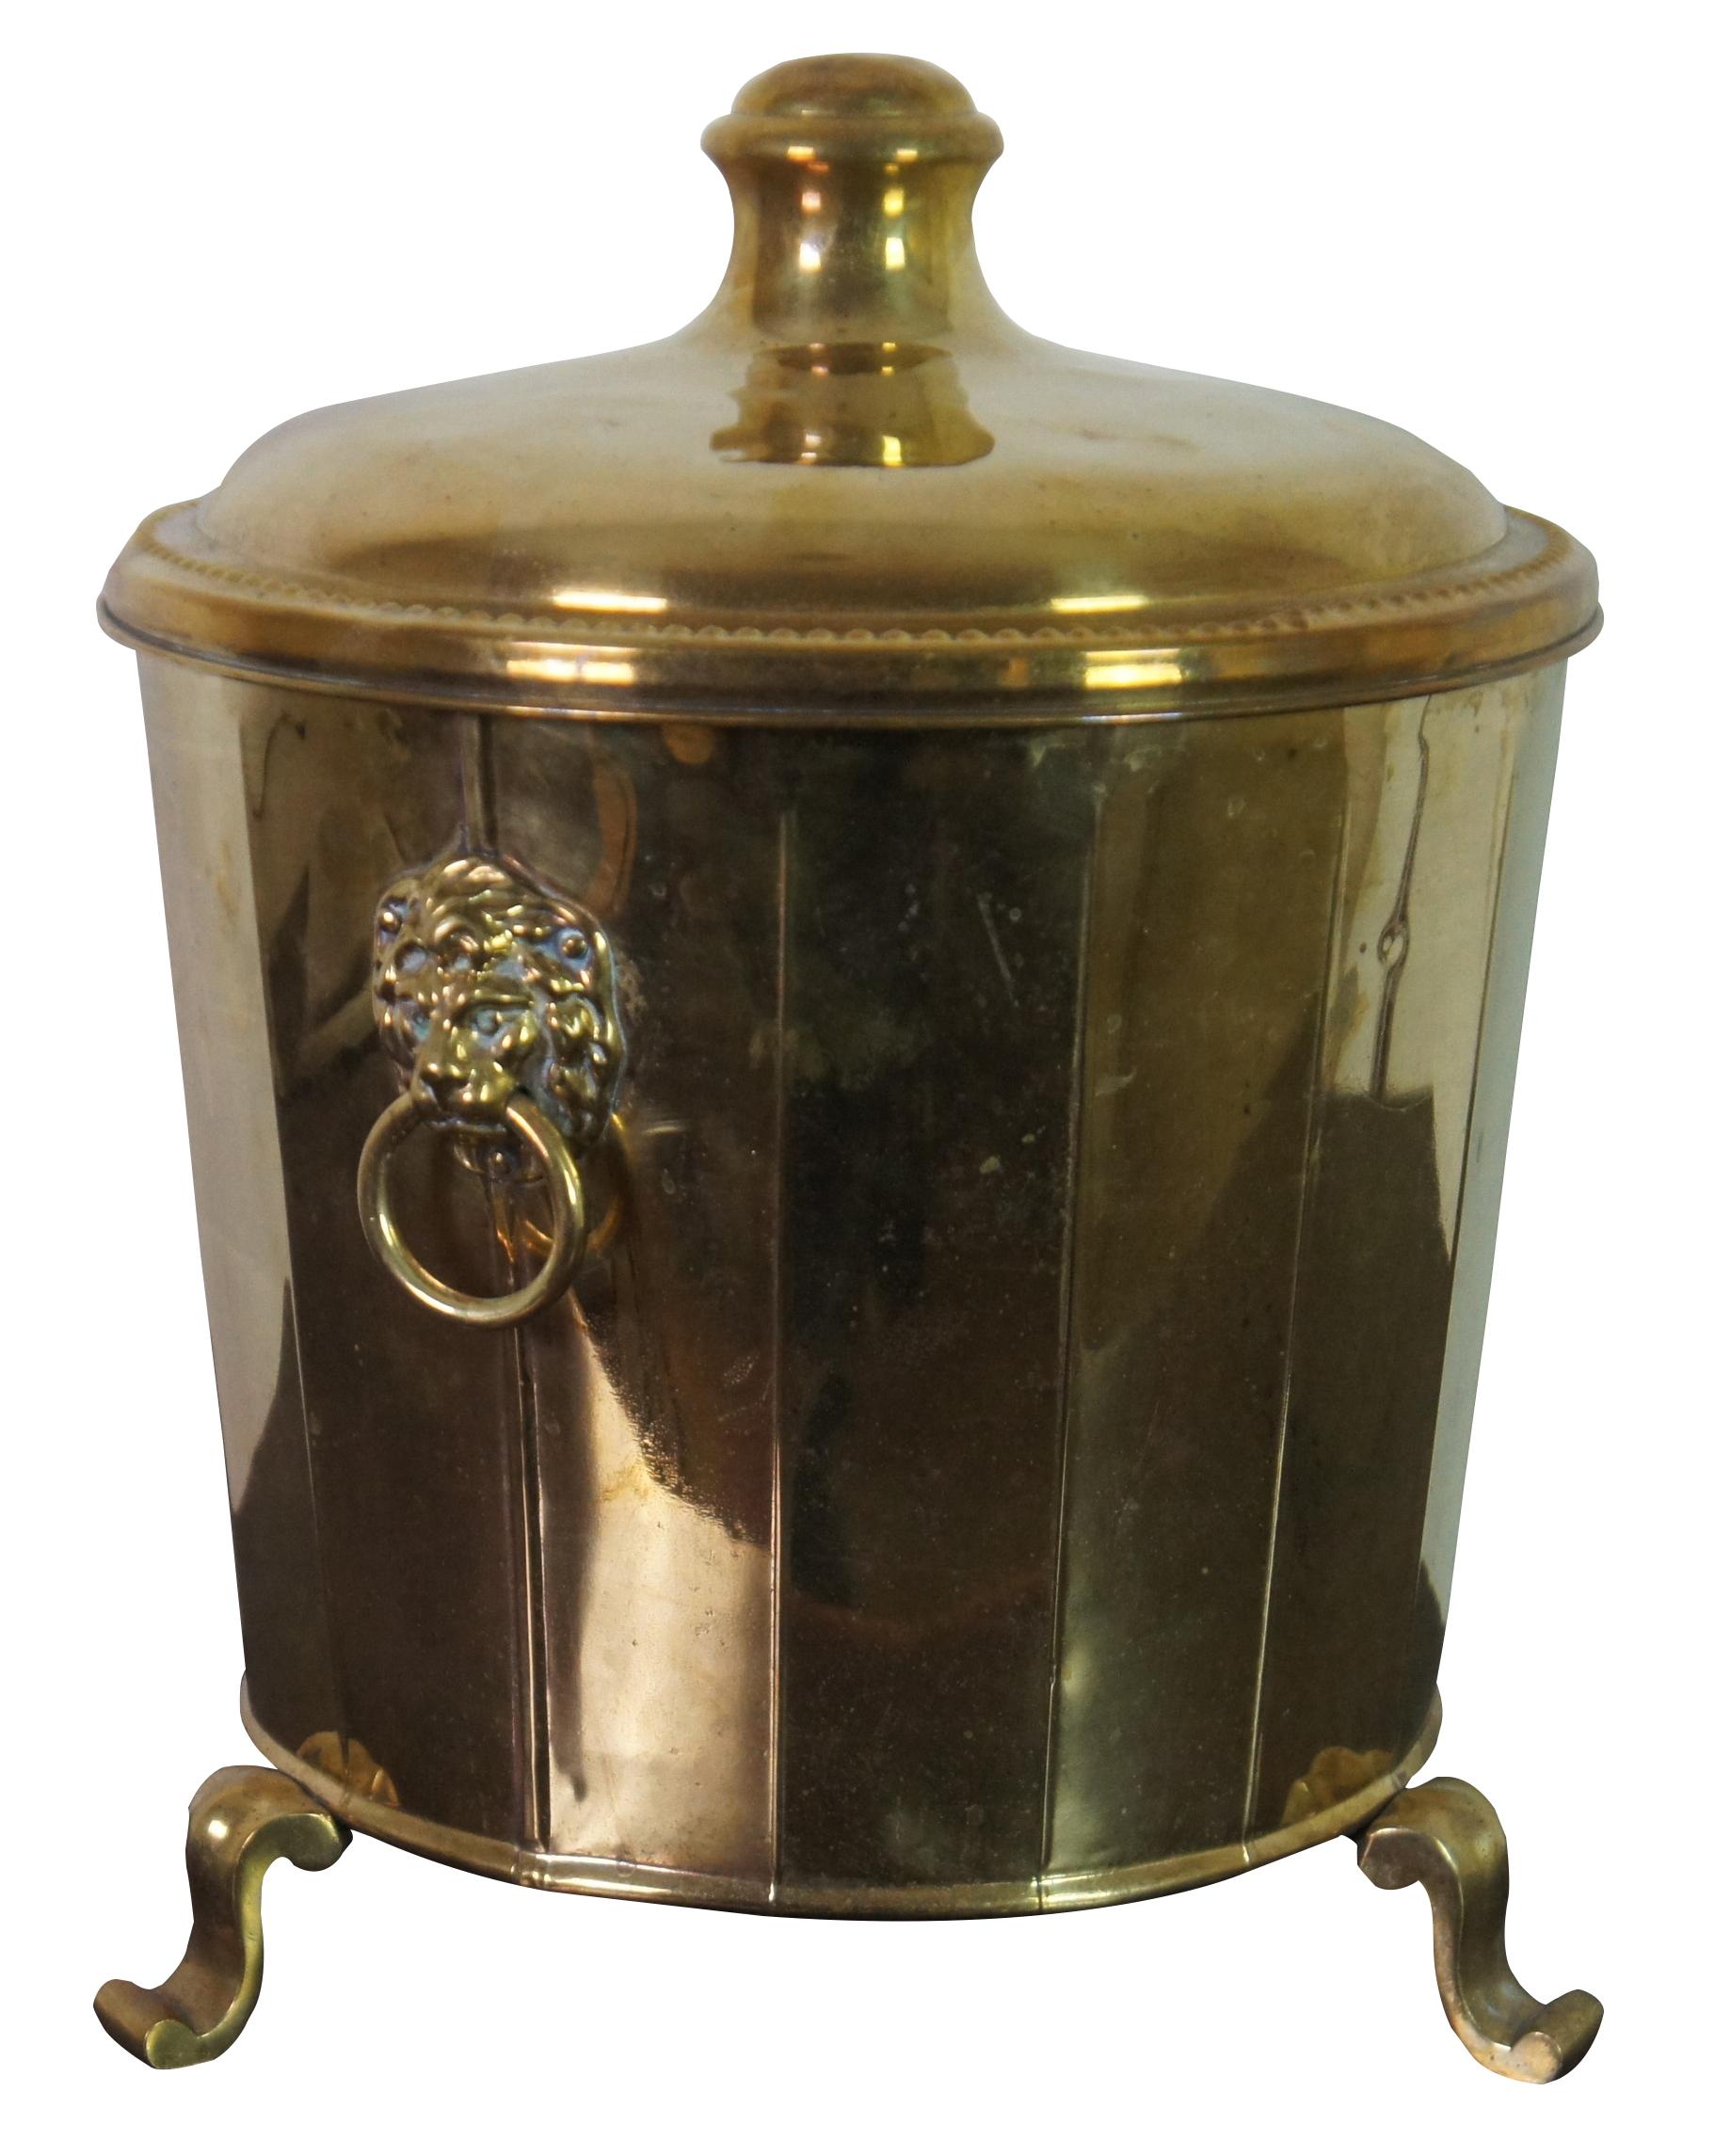 Vintage Empire style brass coal bin with scrolled feet, lion’s head handles, lid, and handled liner.

Provenance : Jerome Schottenstein Estate, Columbus Ohio. Jerome was was an American entrepreneur and philanthropist, co-founder of Schottenstein